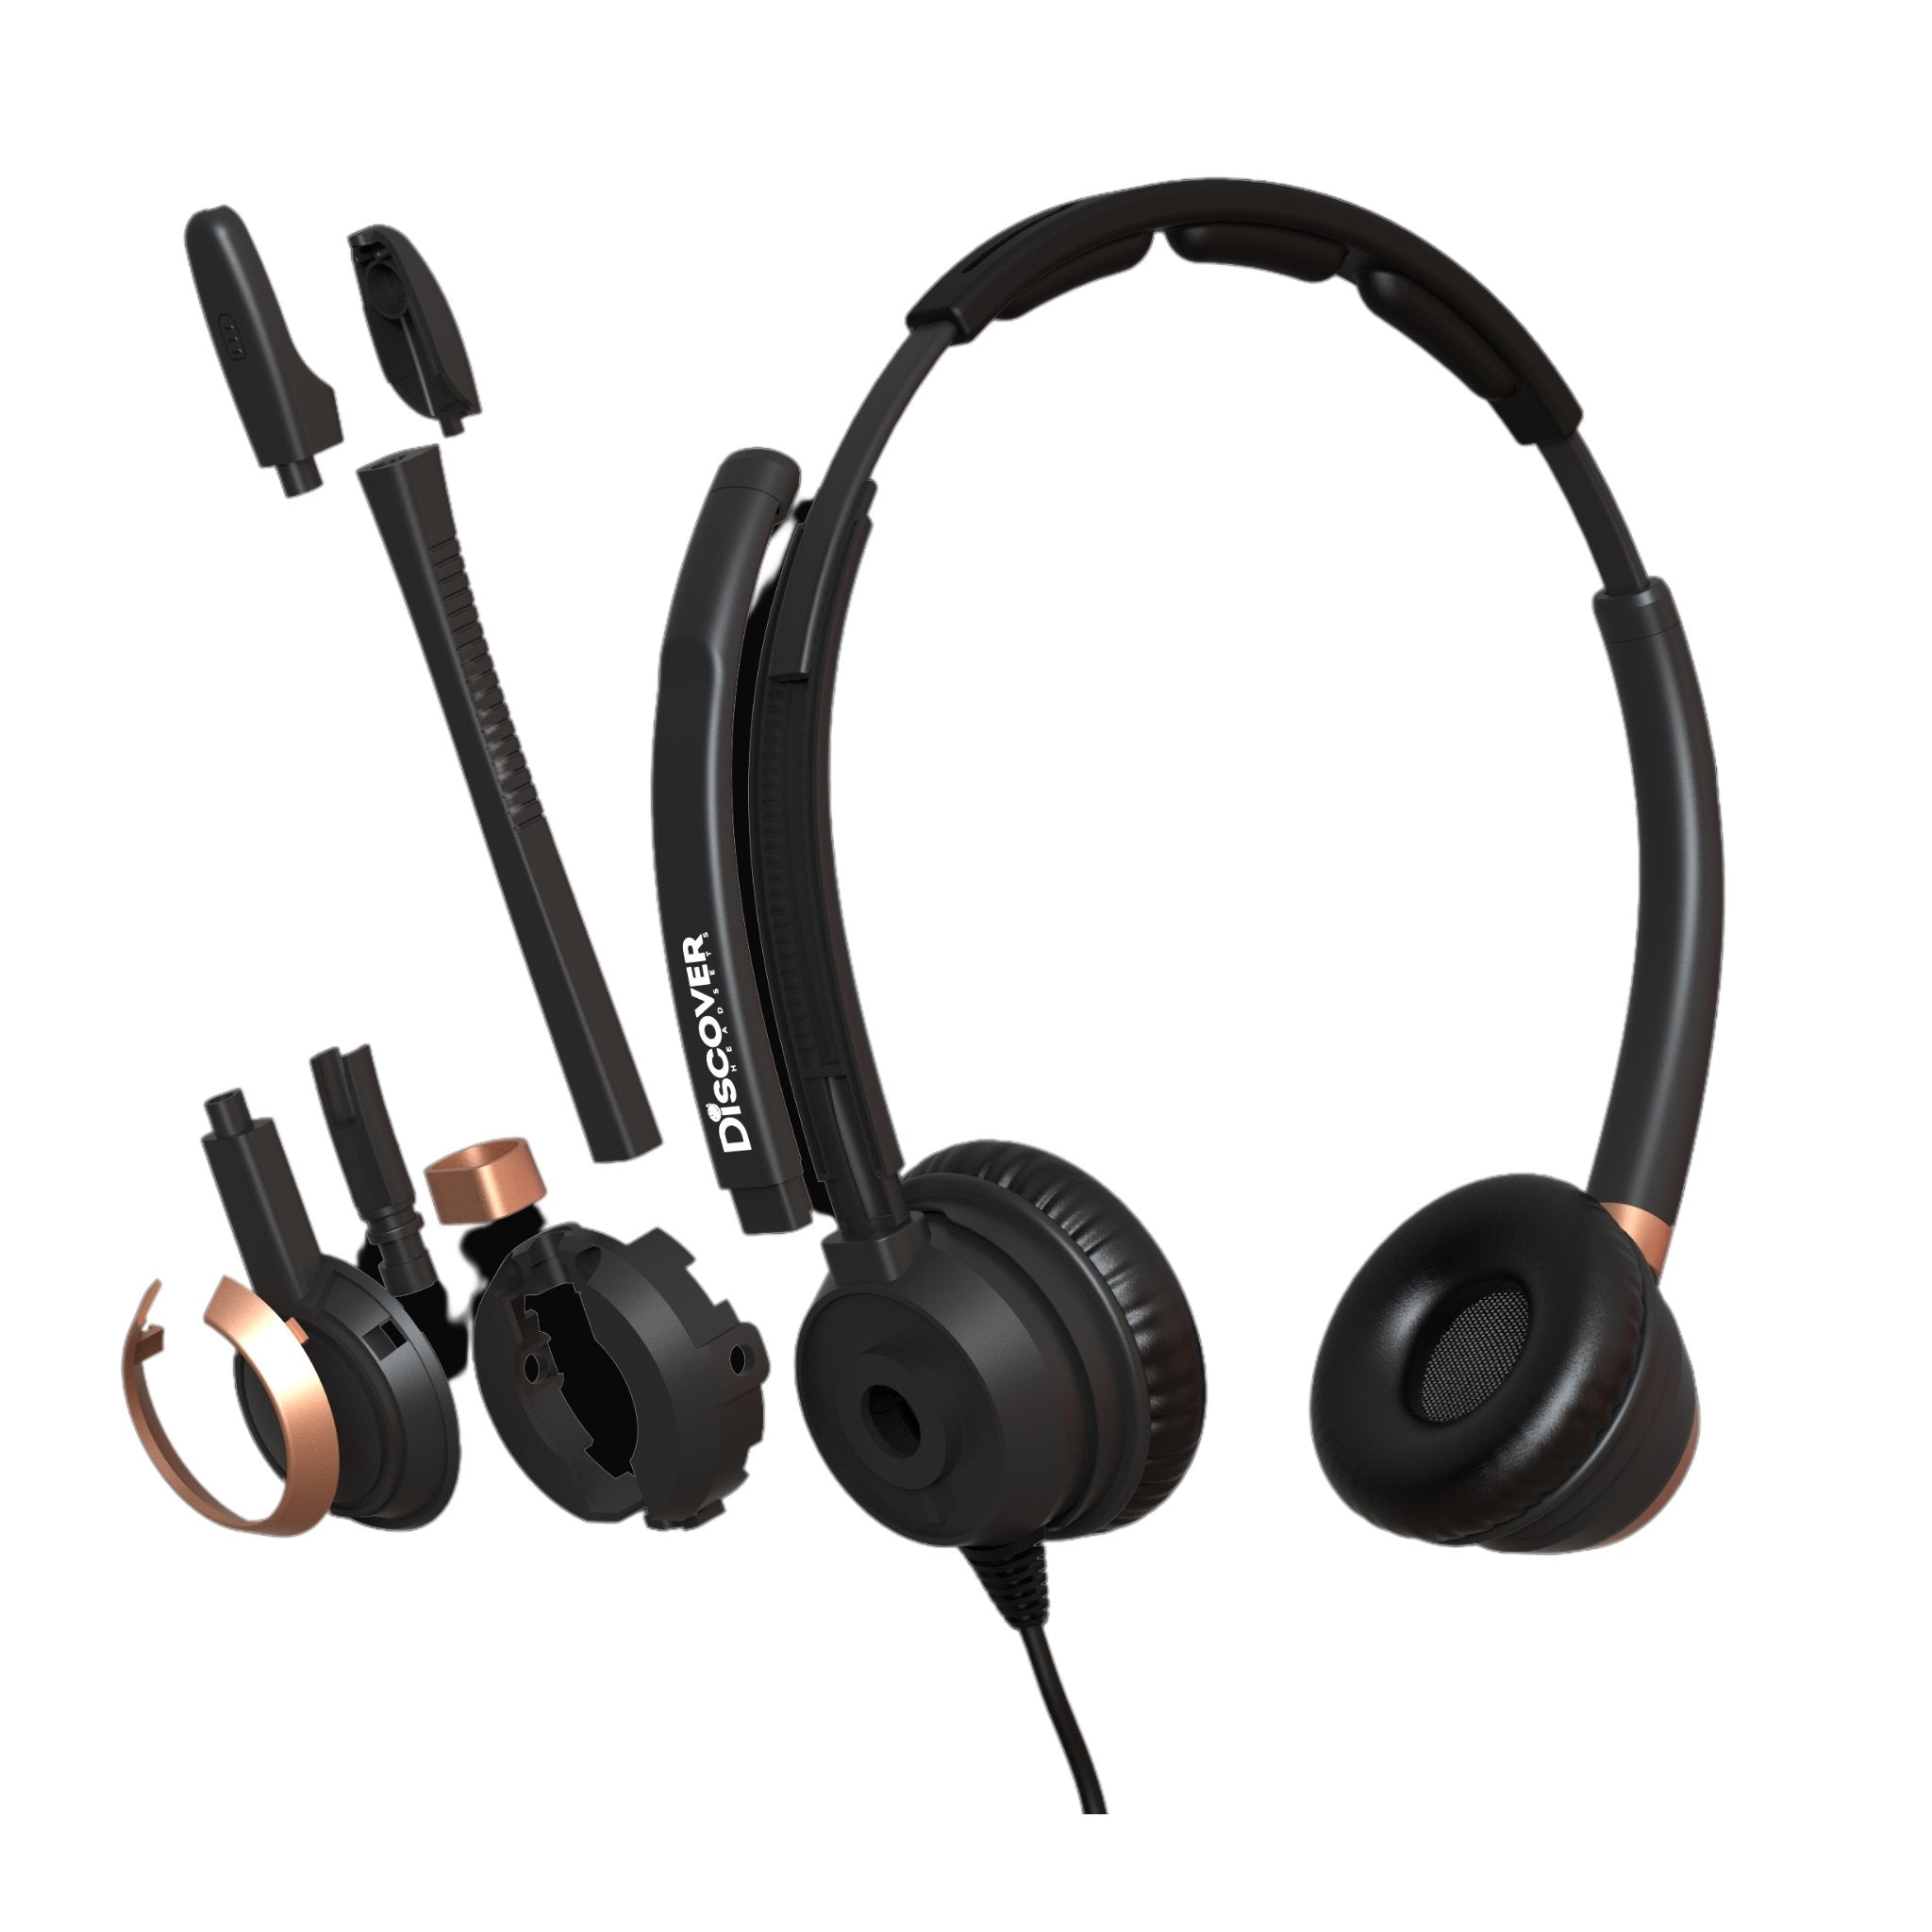 Discover D712U Dual Speaker USB Wired Office Headset For Professionals - Headset Advisor